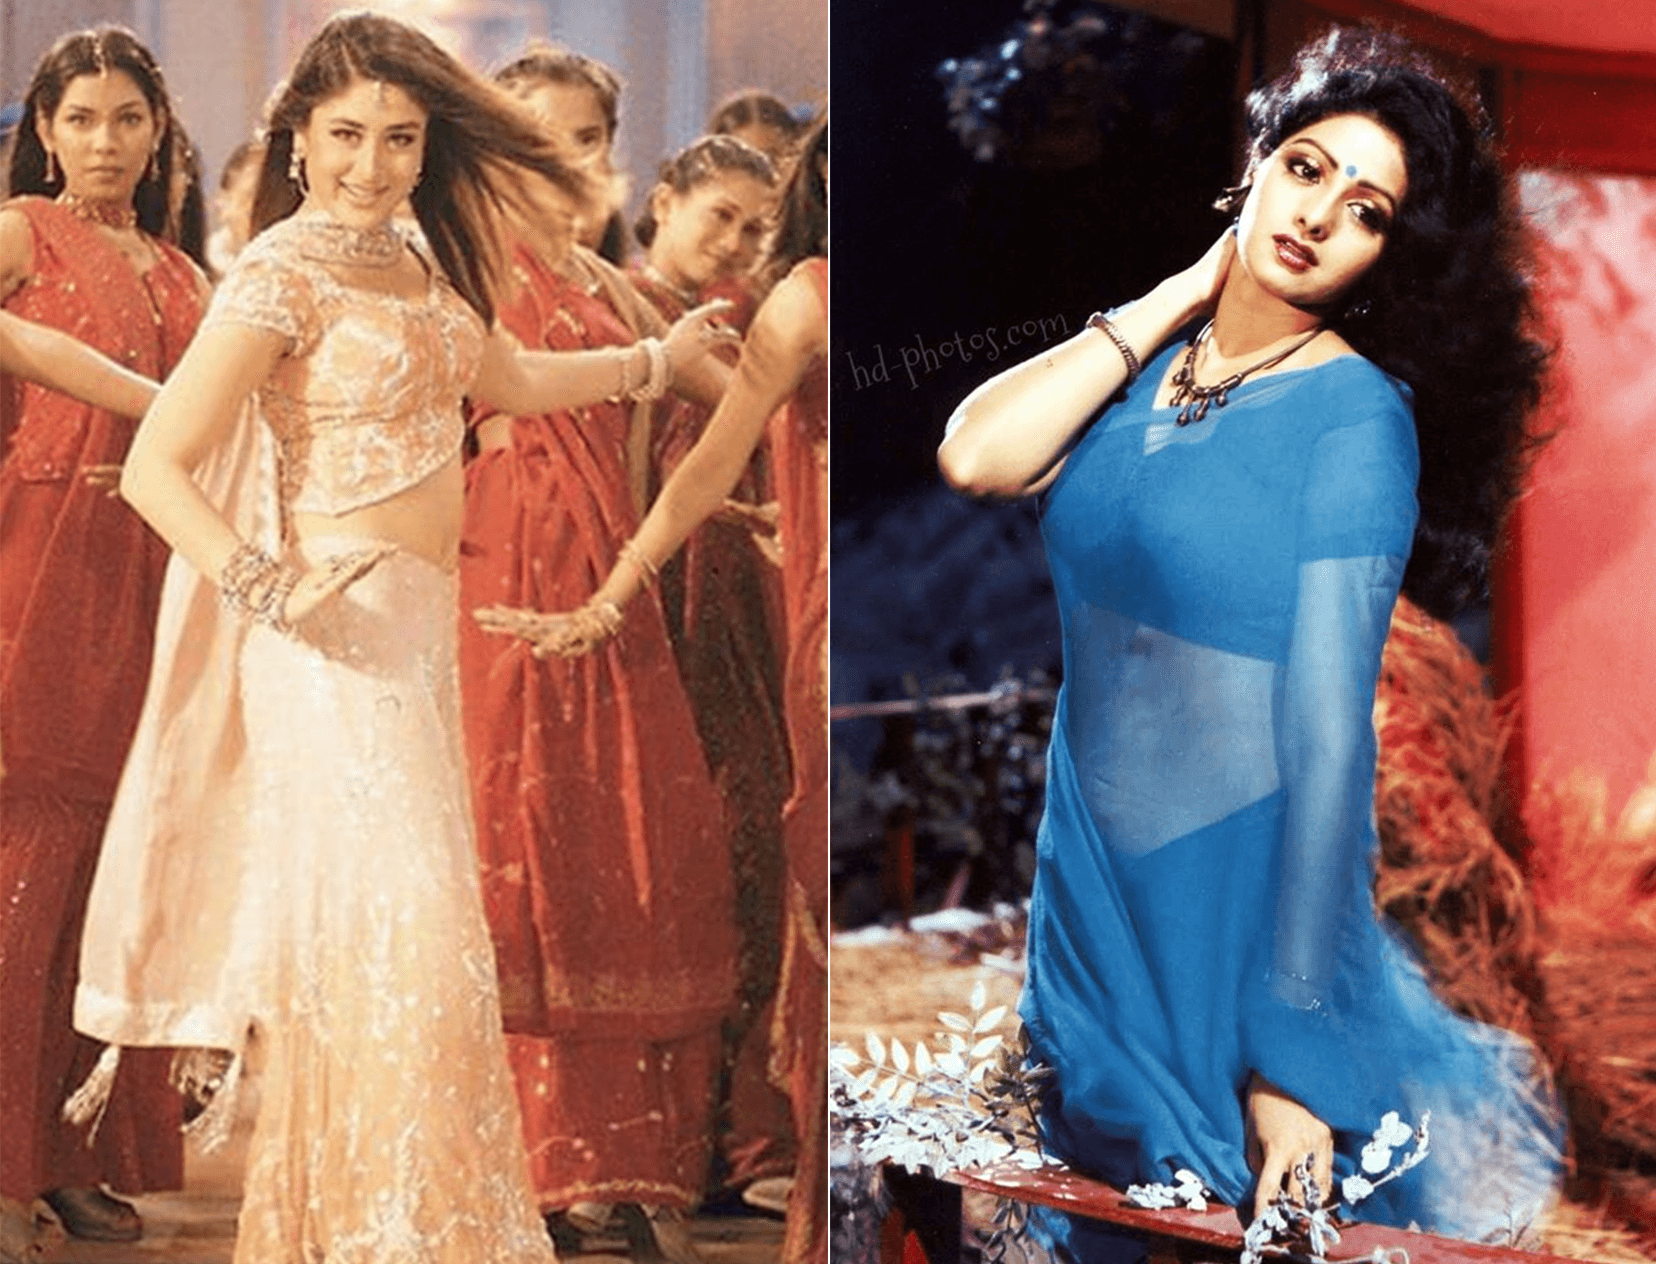 12 Outfits Actresses Wore In Bollywood Movies That I Would LOVE To Add To My Closet